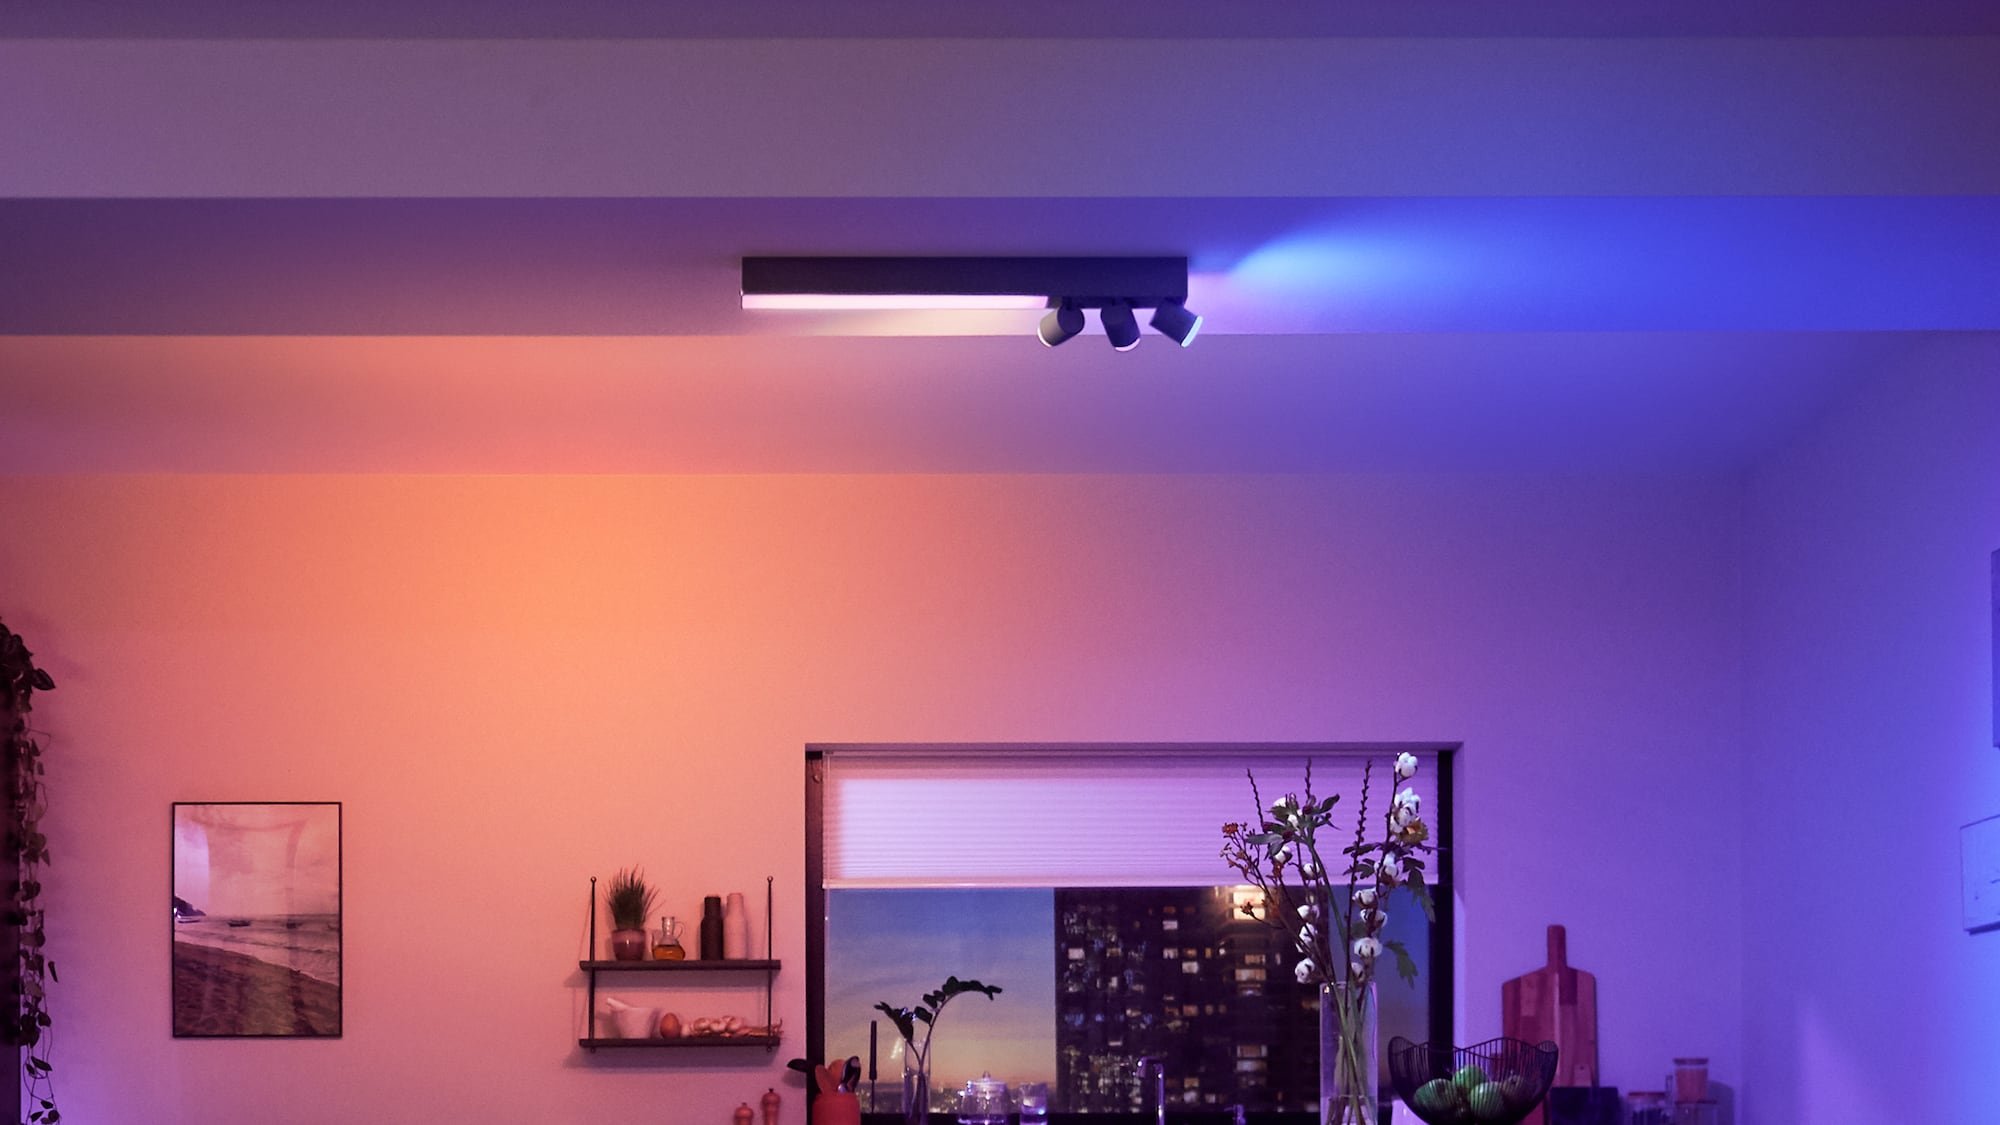 Philips Hue Centris Smart Ceiling Spotlight lets you set just the right mood